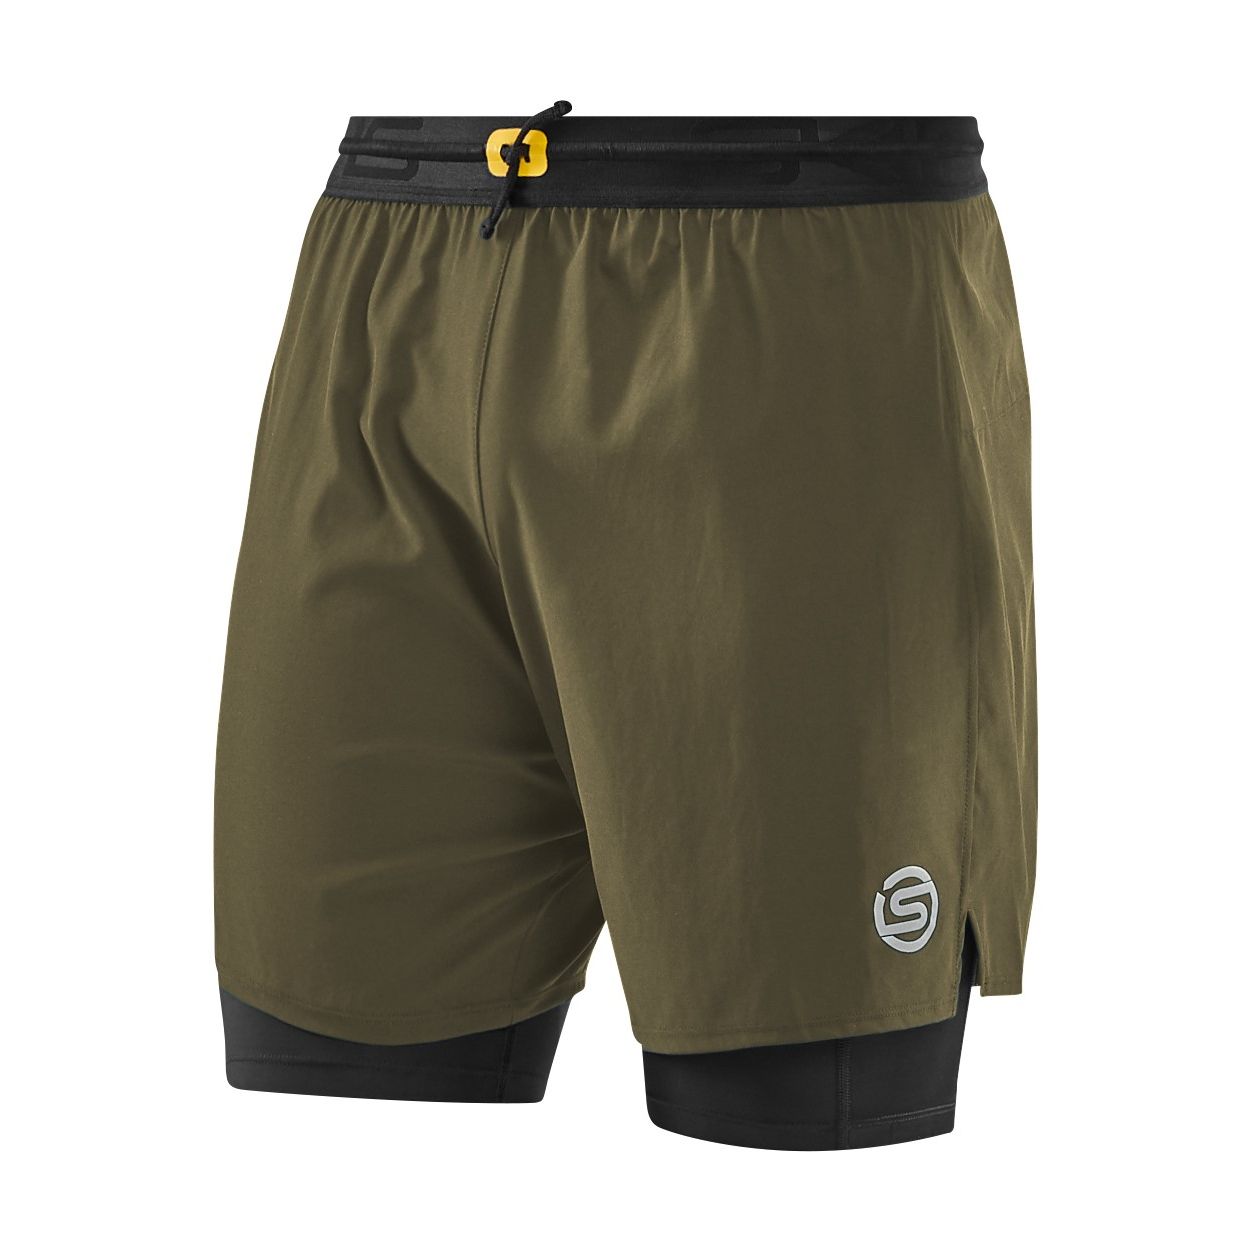 SKINS DNAmic Compression shorts Review – irunoffroad